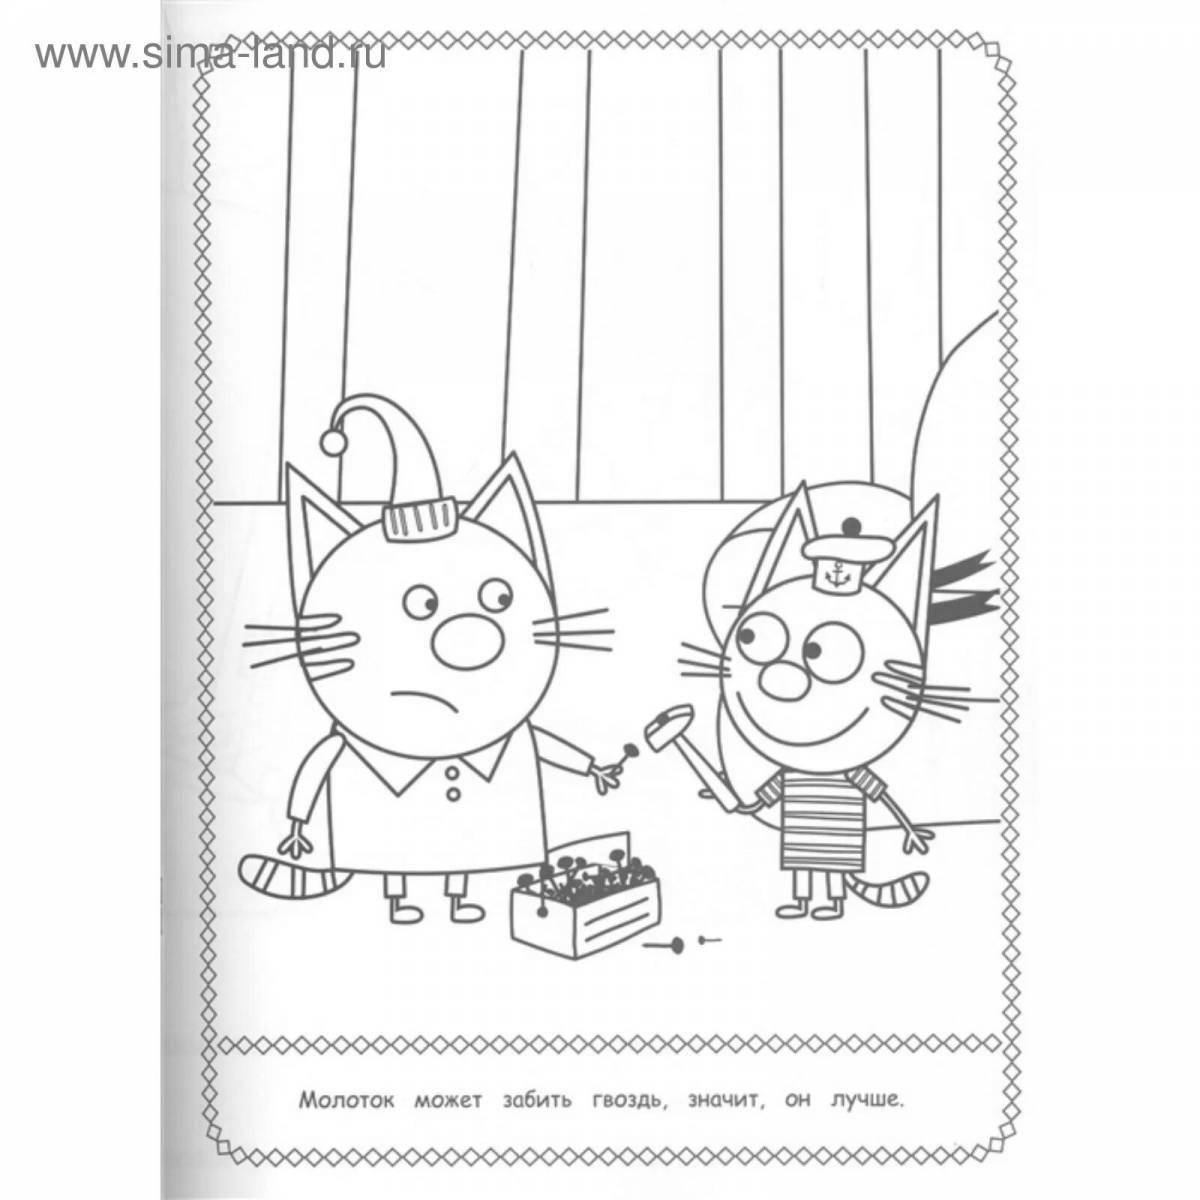 Playful coloring 3 cats for girls